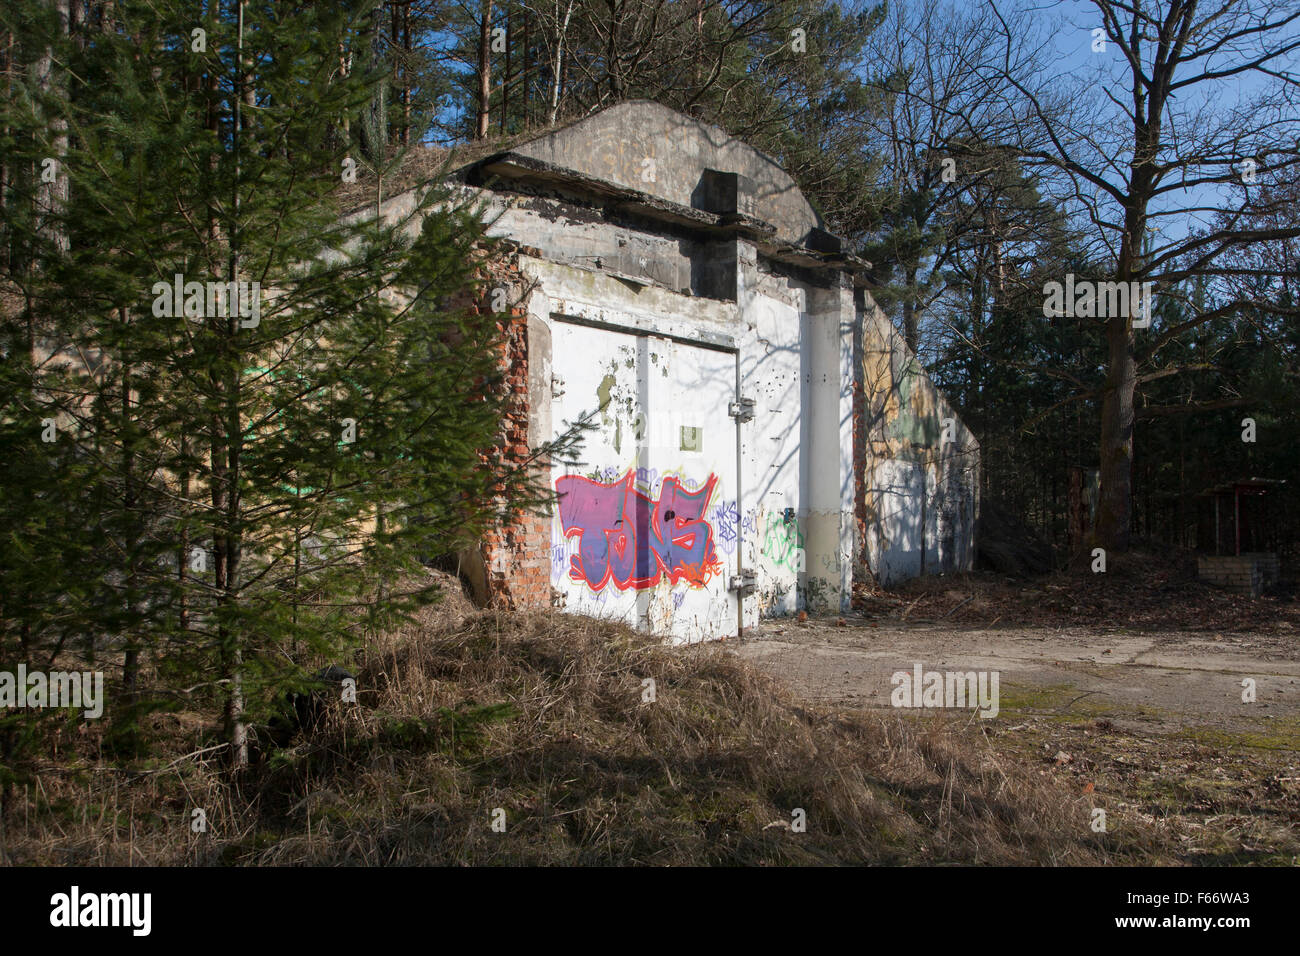 graffiti at a former red army missile silo, neuthymen, brandenburg, germany Stock Photo